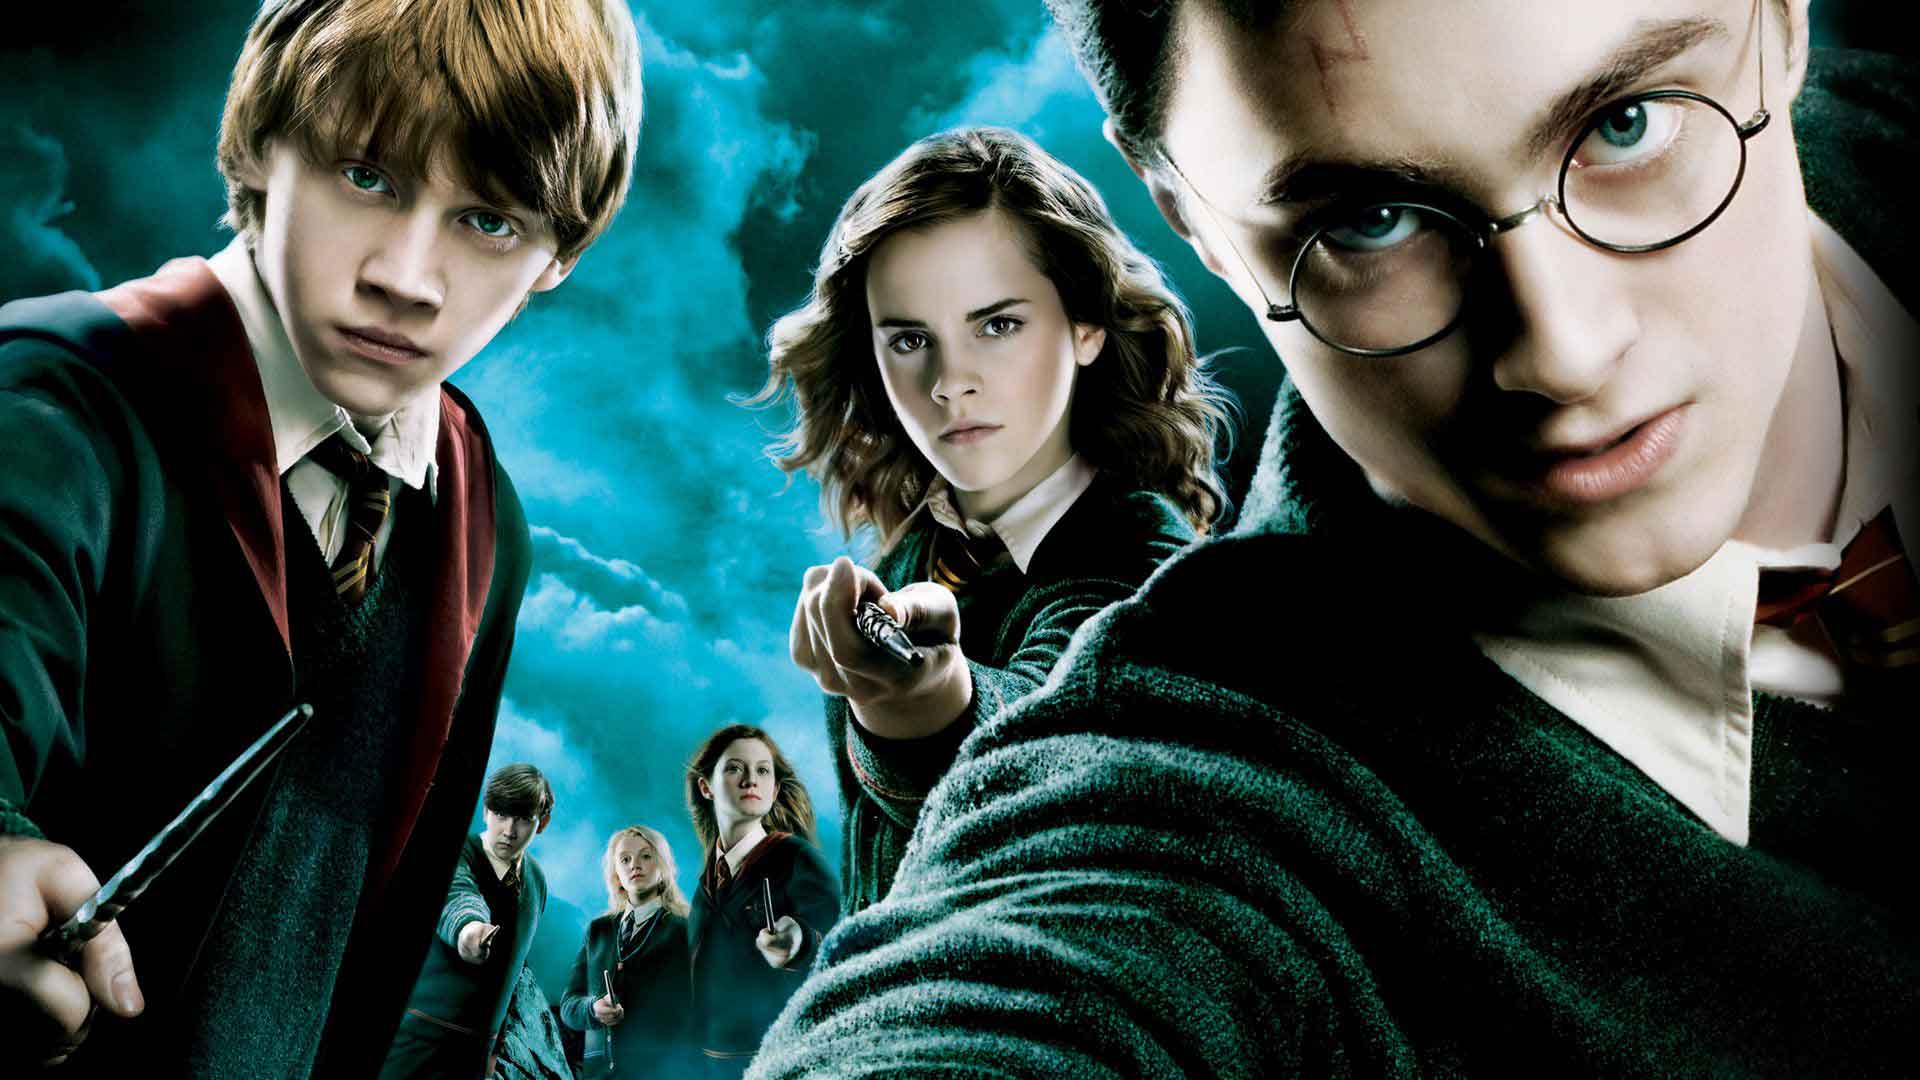 40 Inspirational Harry Potter Quotes Full Of Magical Life Lessons